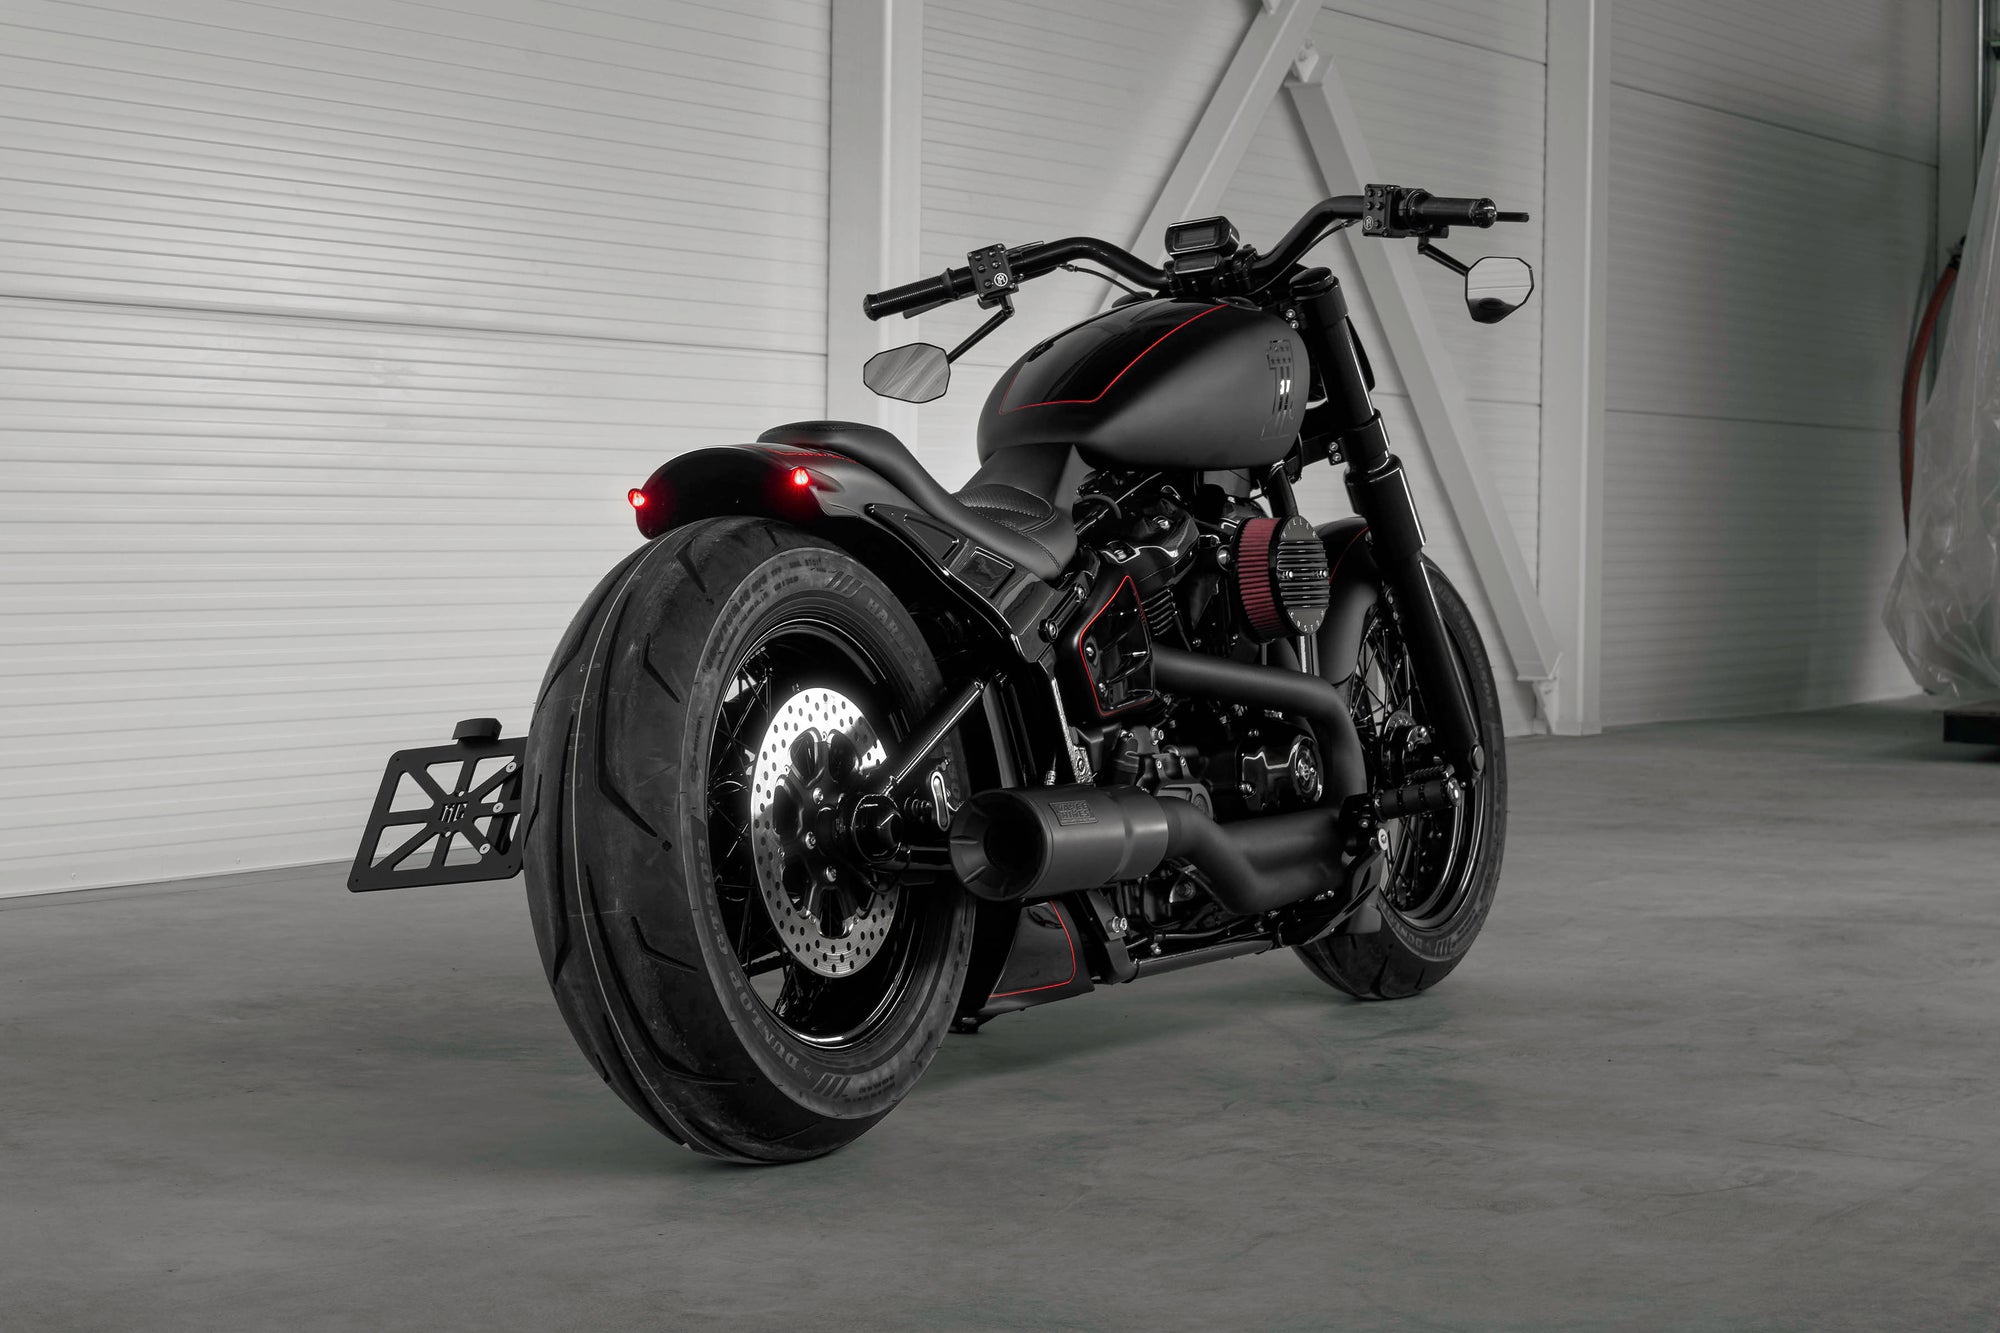 Modified Harley Davidson Softail Standard motorcycle with Killer Custom parts from the rear in a modern white garage